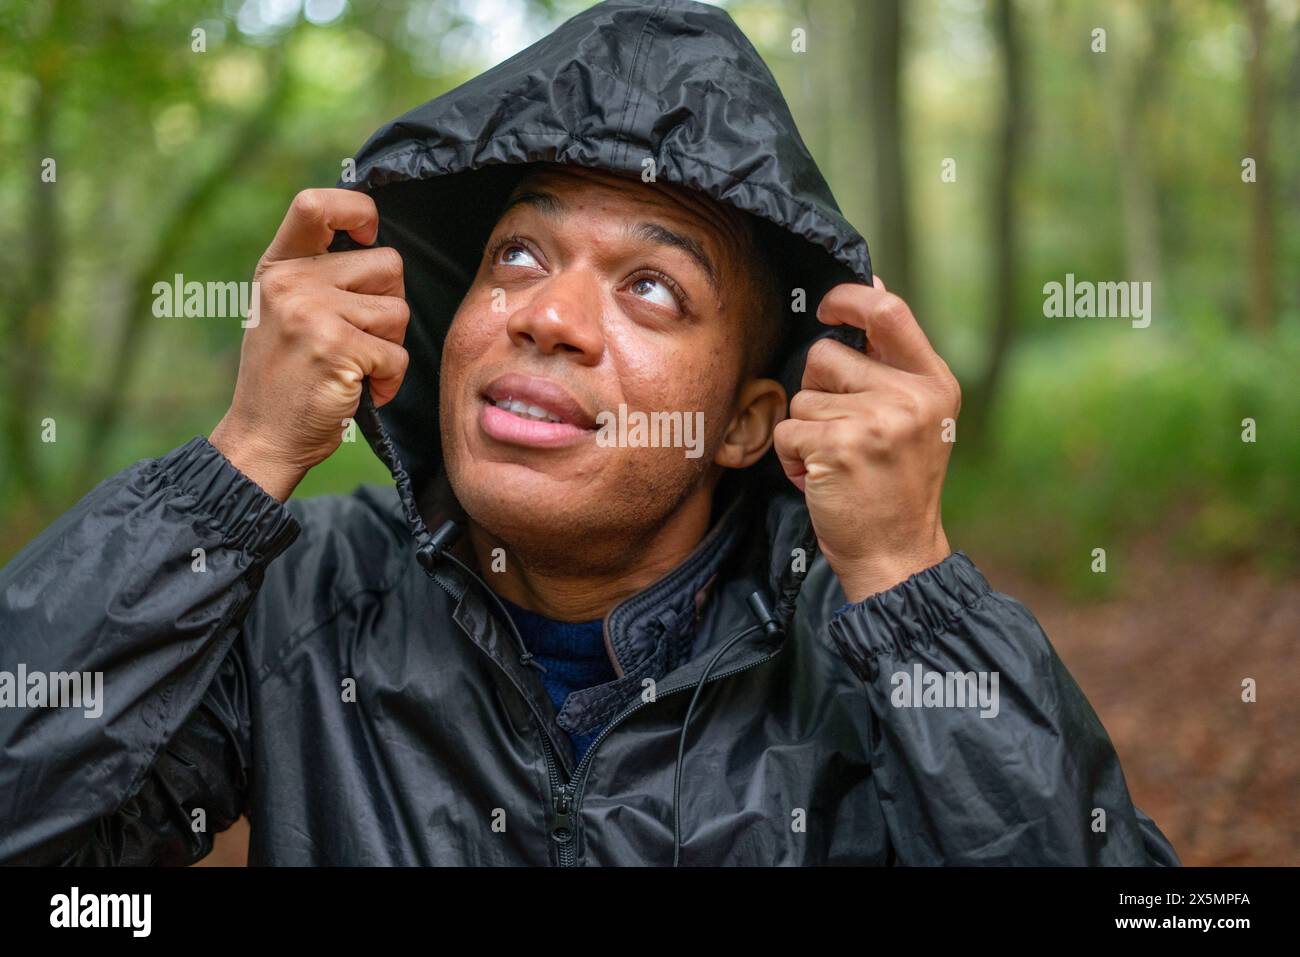 Man with rain jackets hood on looking up in forest Stock Photo